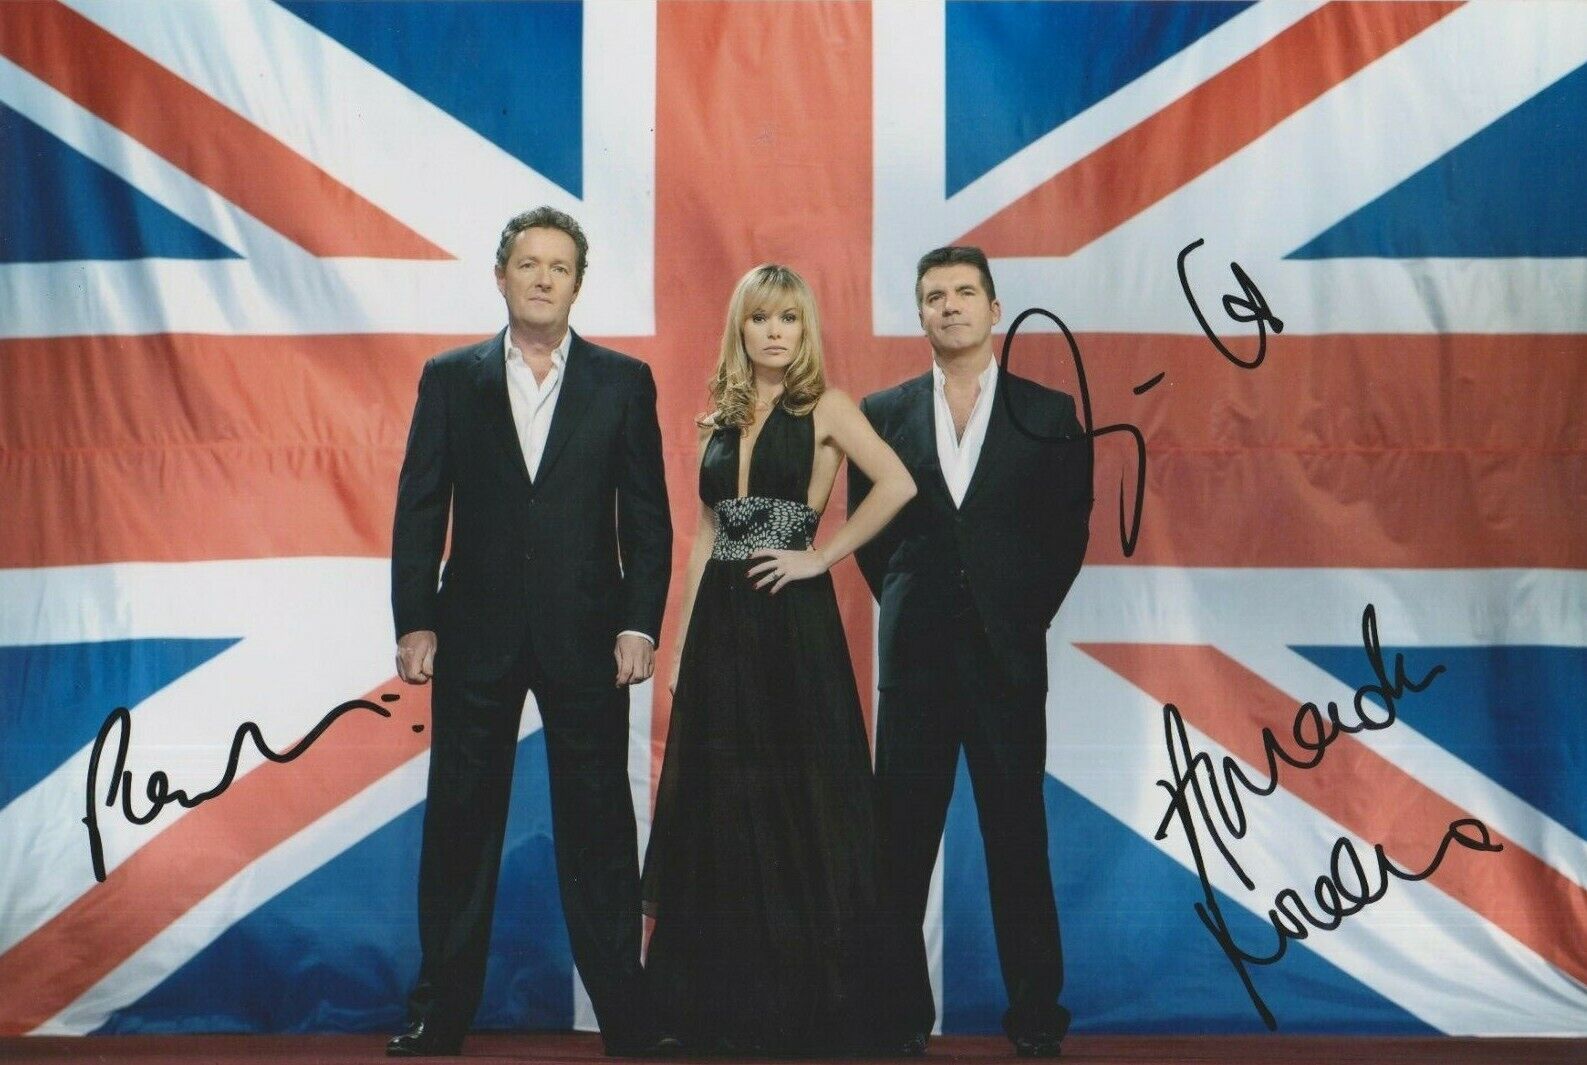 Britains Got Talent **HAND SIGNED** 8x12 Photo Poster painting ~ Cowell, Morgan, Holden